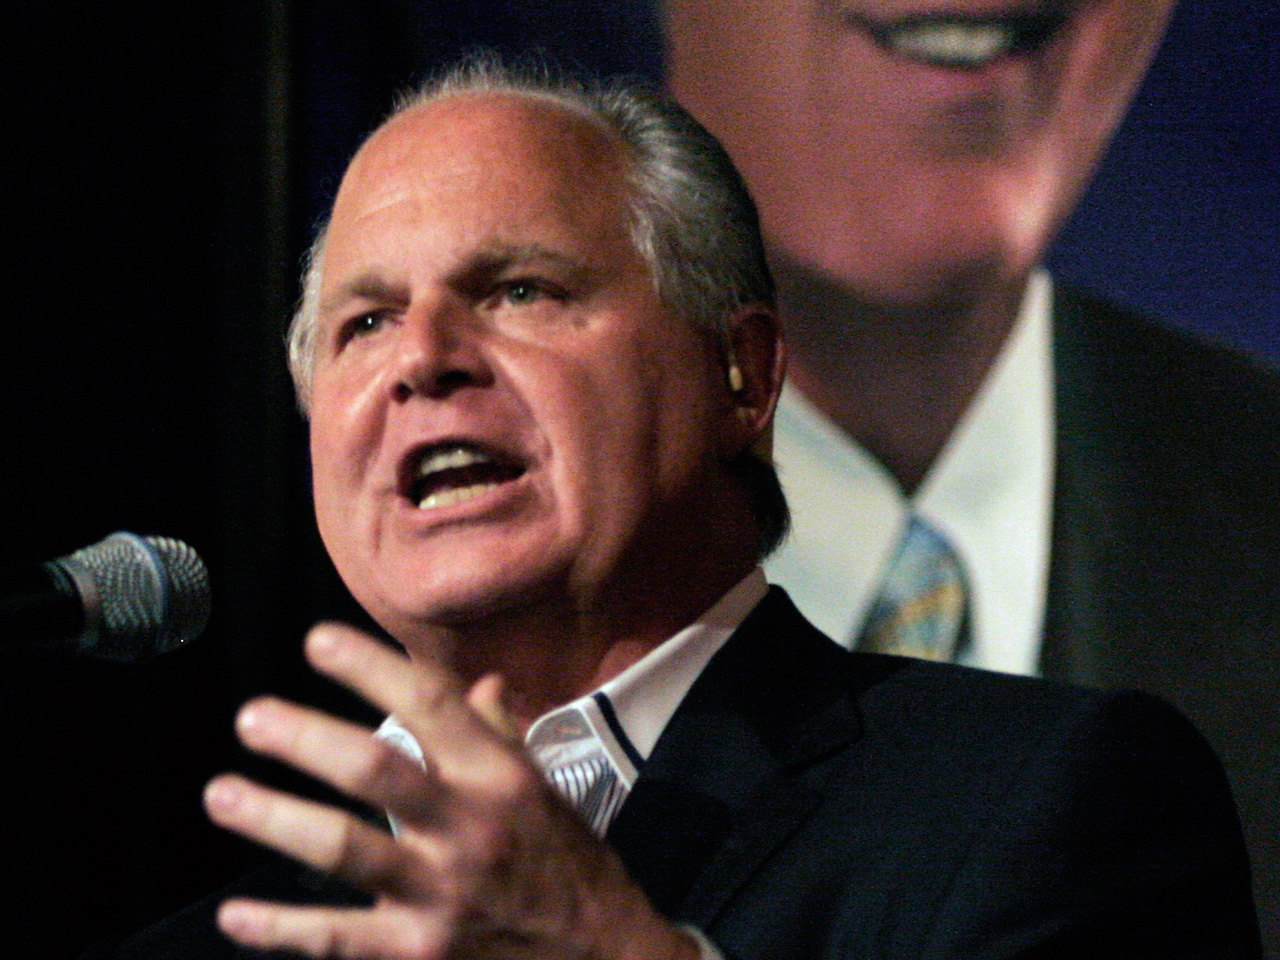 Nine advertisers have pulled out of Limbaugh's show - CBS News1280 x 960